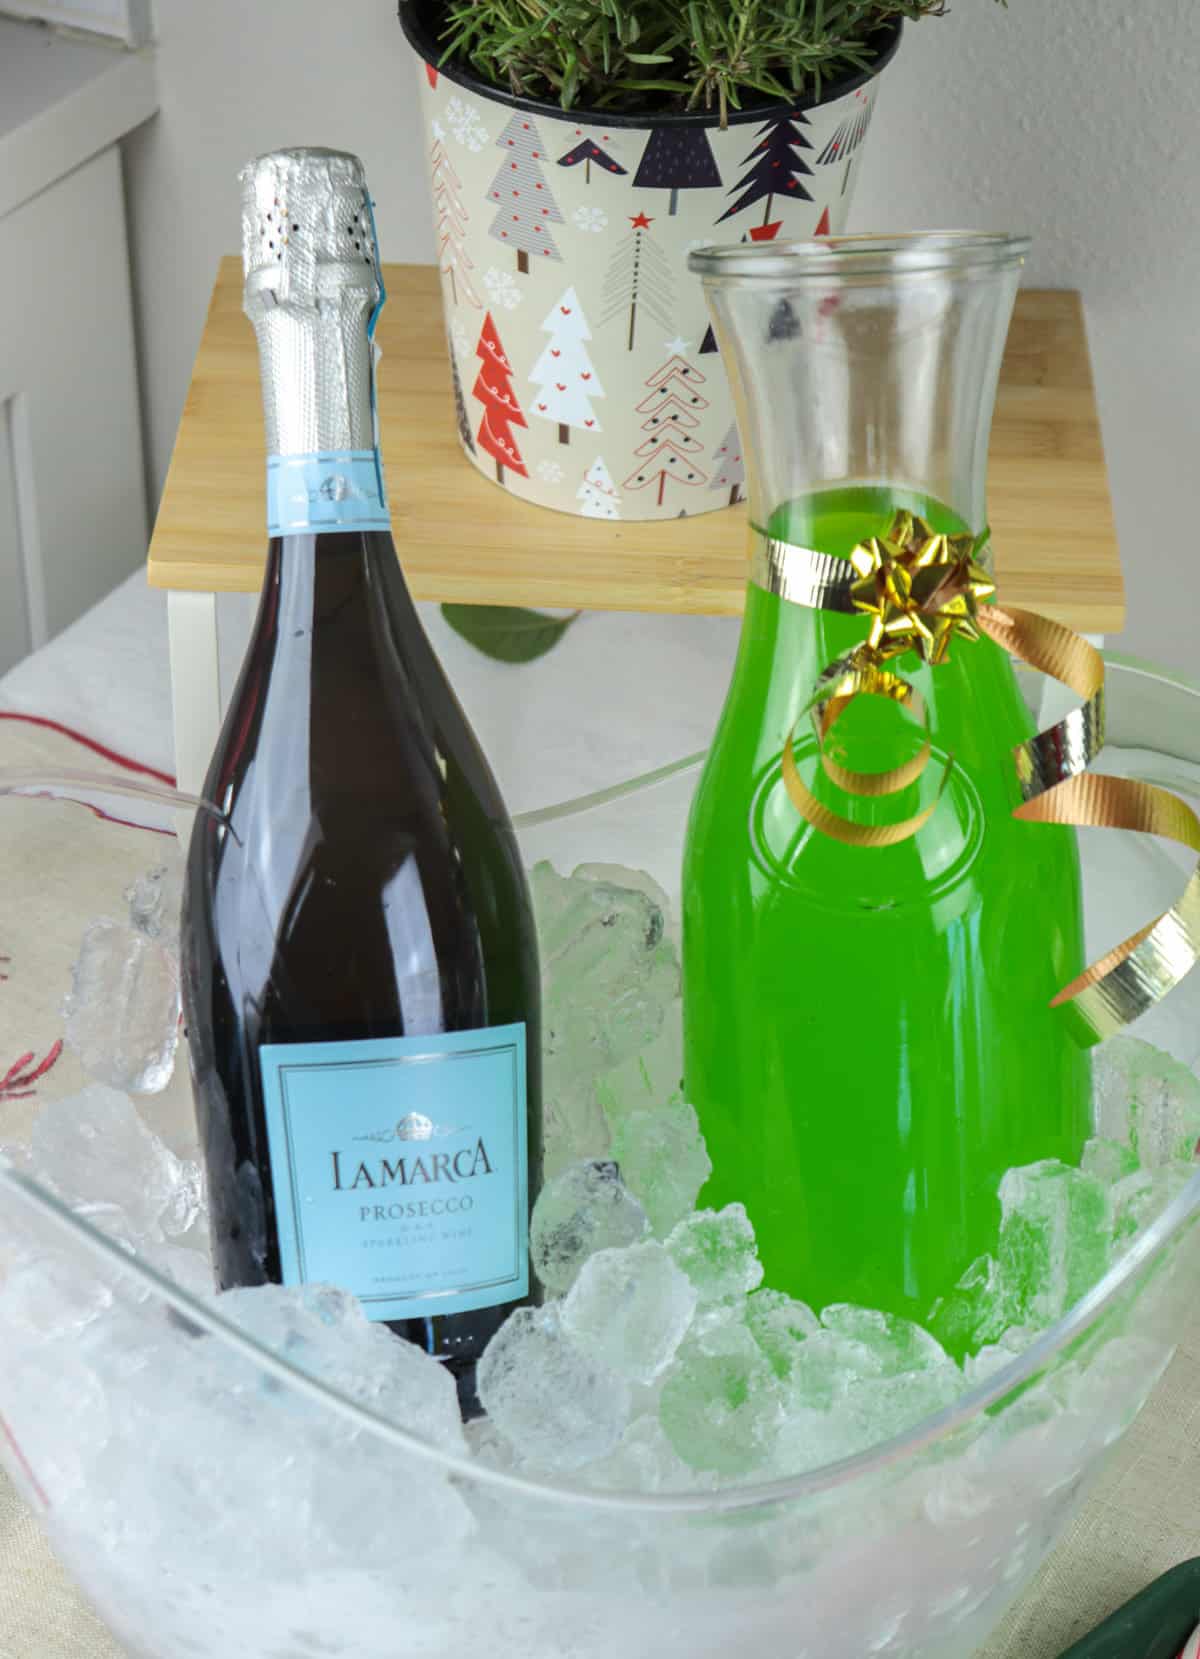 Prosecco and green juice in carafes over ice.